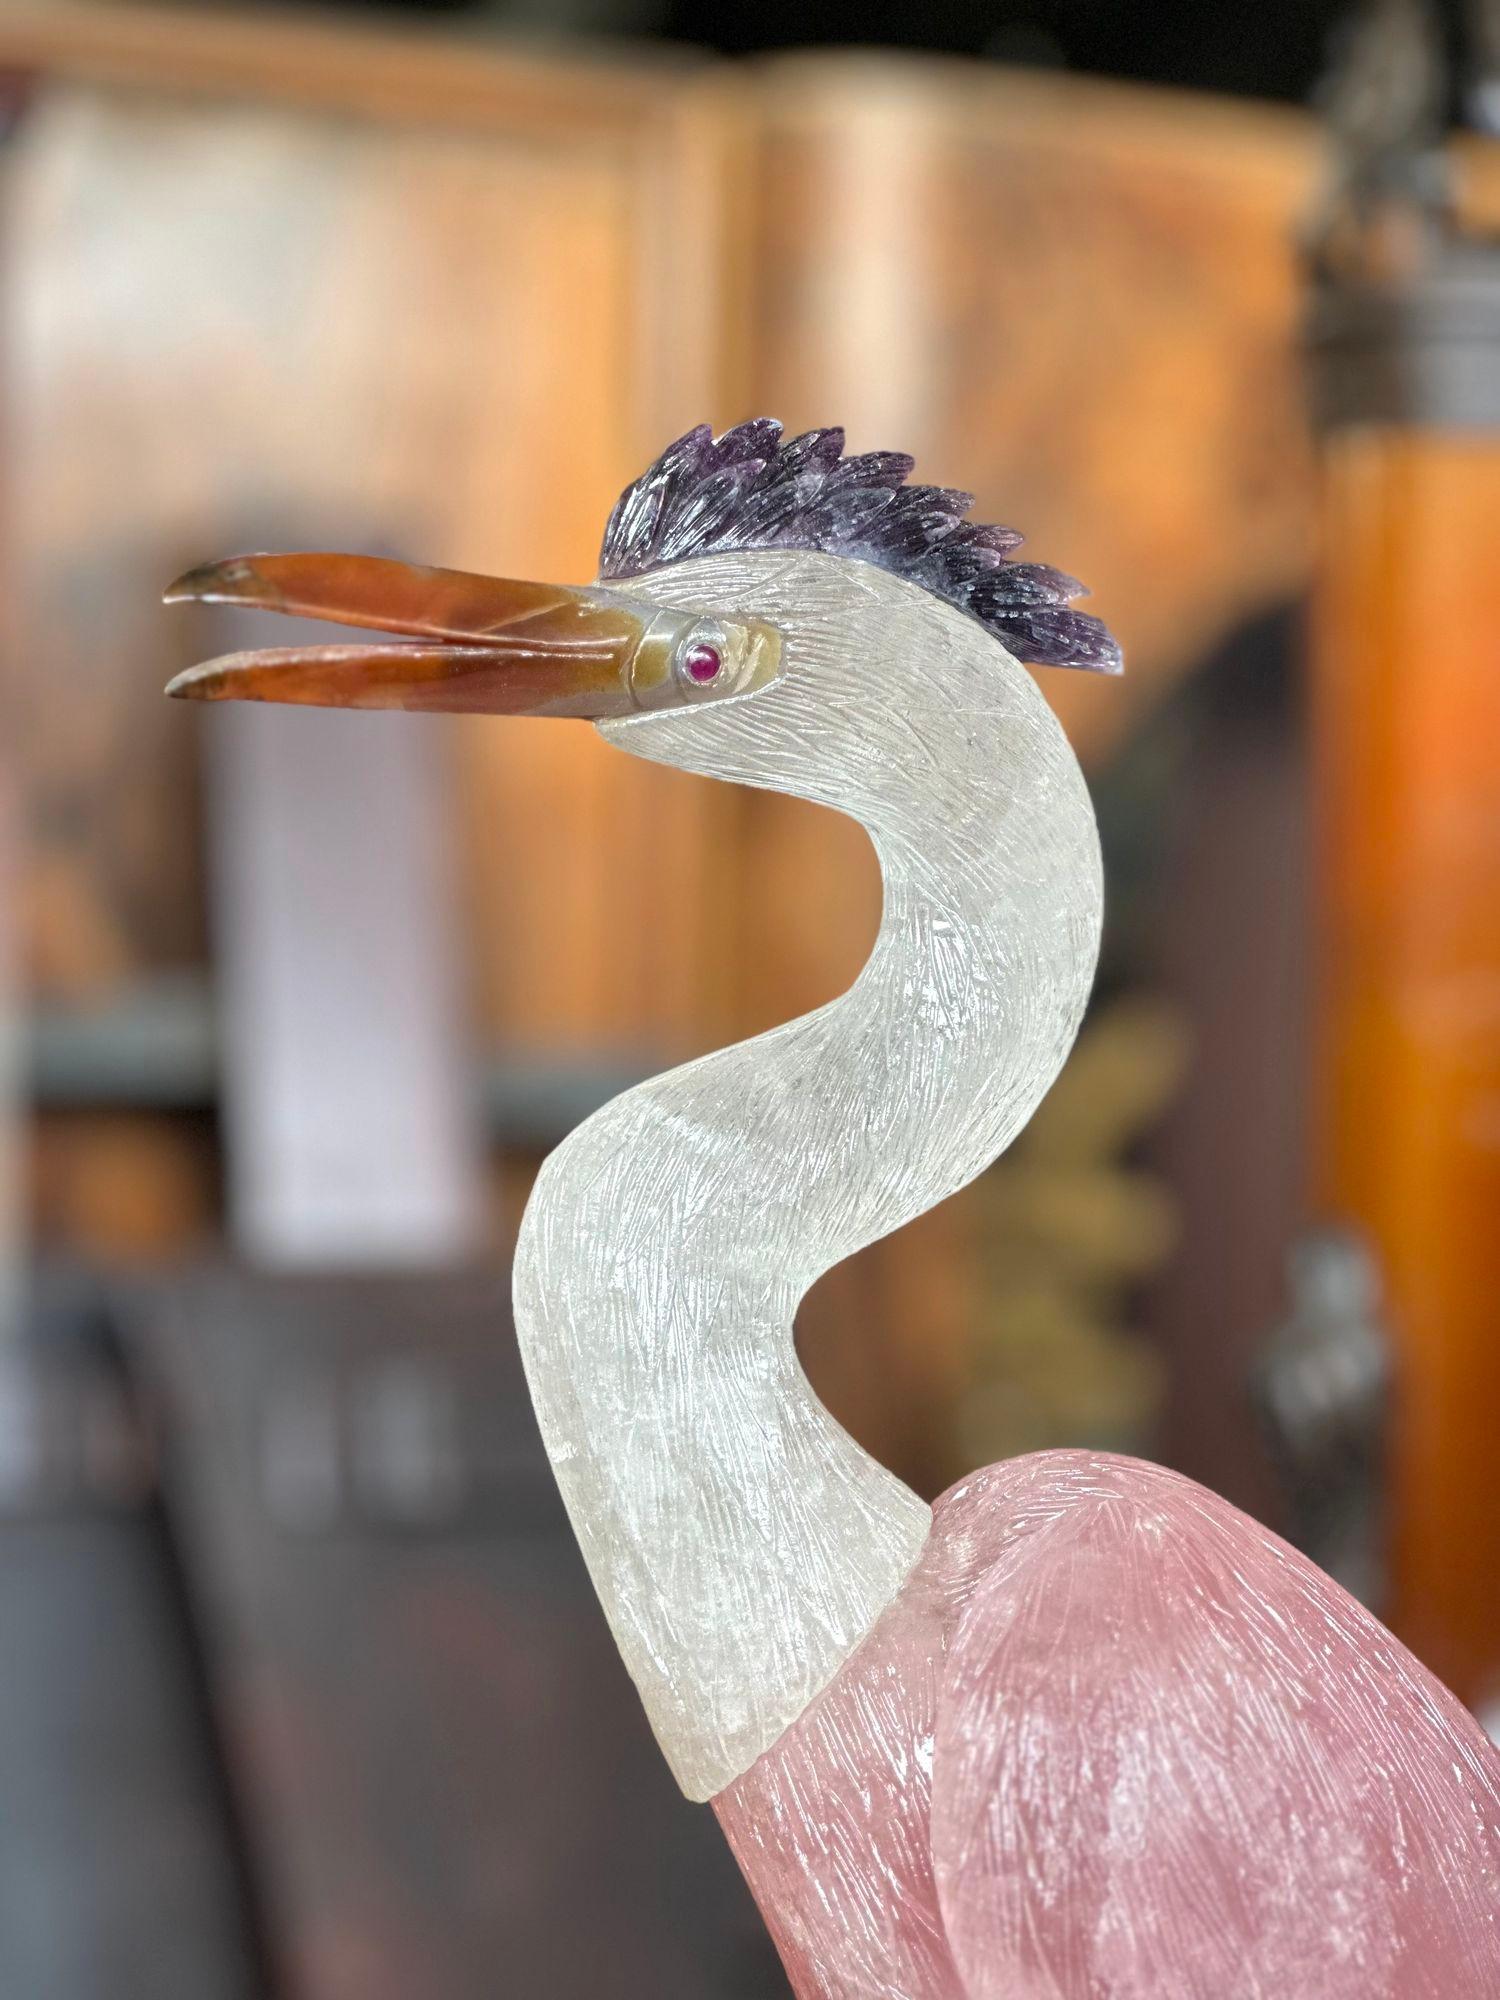 Heron bird sculpture made with rock crystal, rose quartz, agate, amethyst and metal limbs. Stands on a gorgeous amethyst base with flower details made of tiger's eye petals.